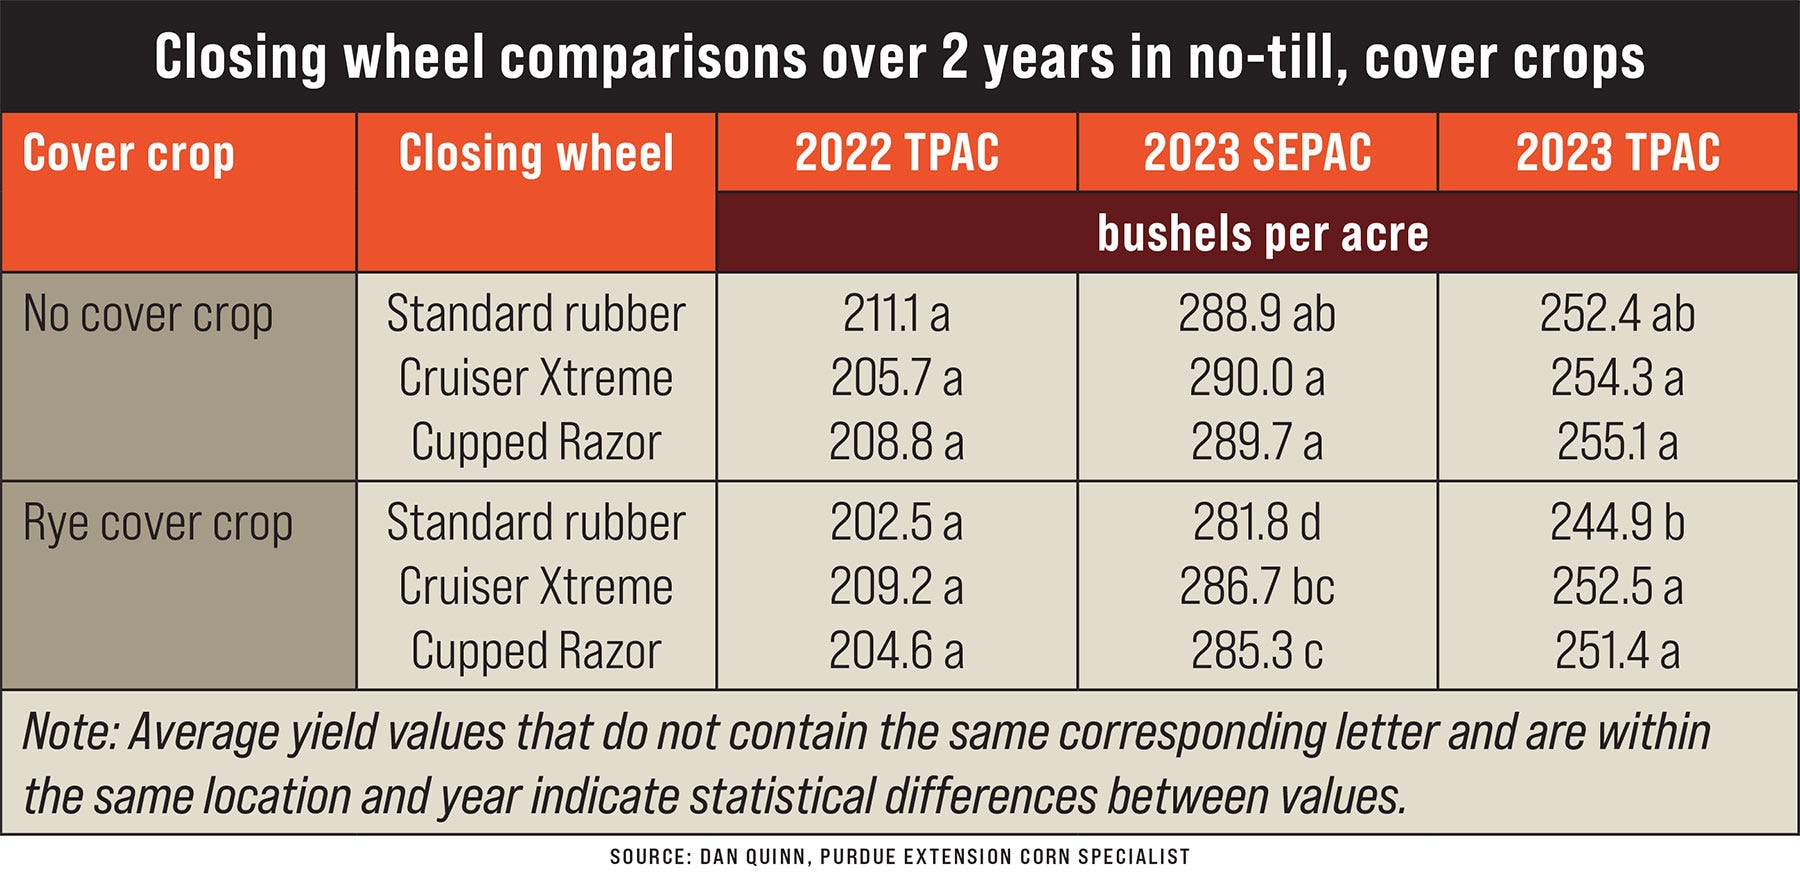 A table outlining closing wheel comparisons over 2 years in no-till, cover crops